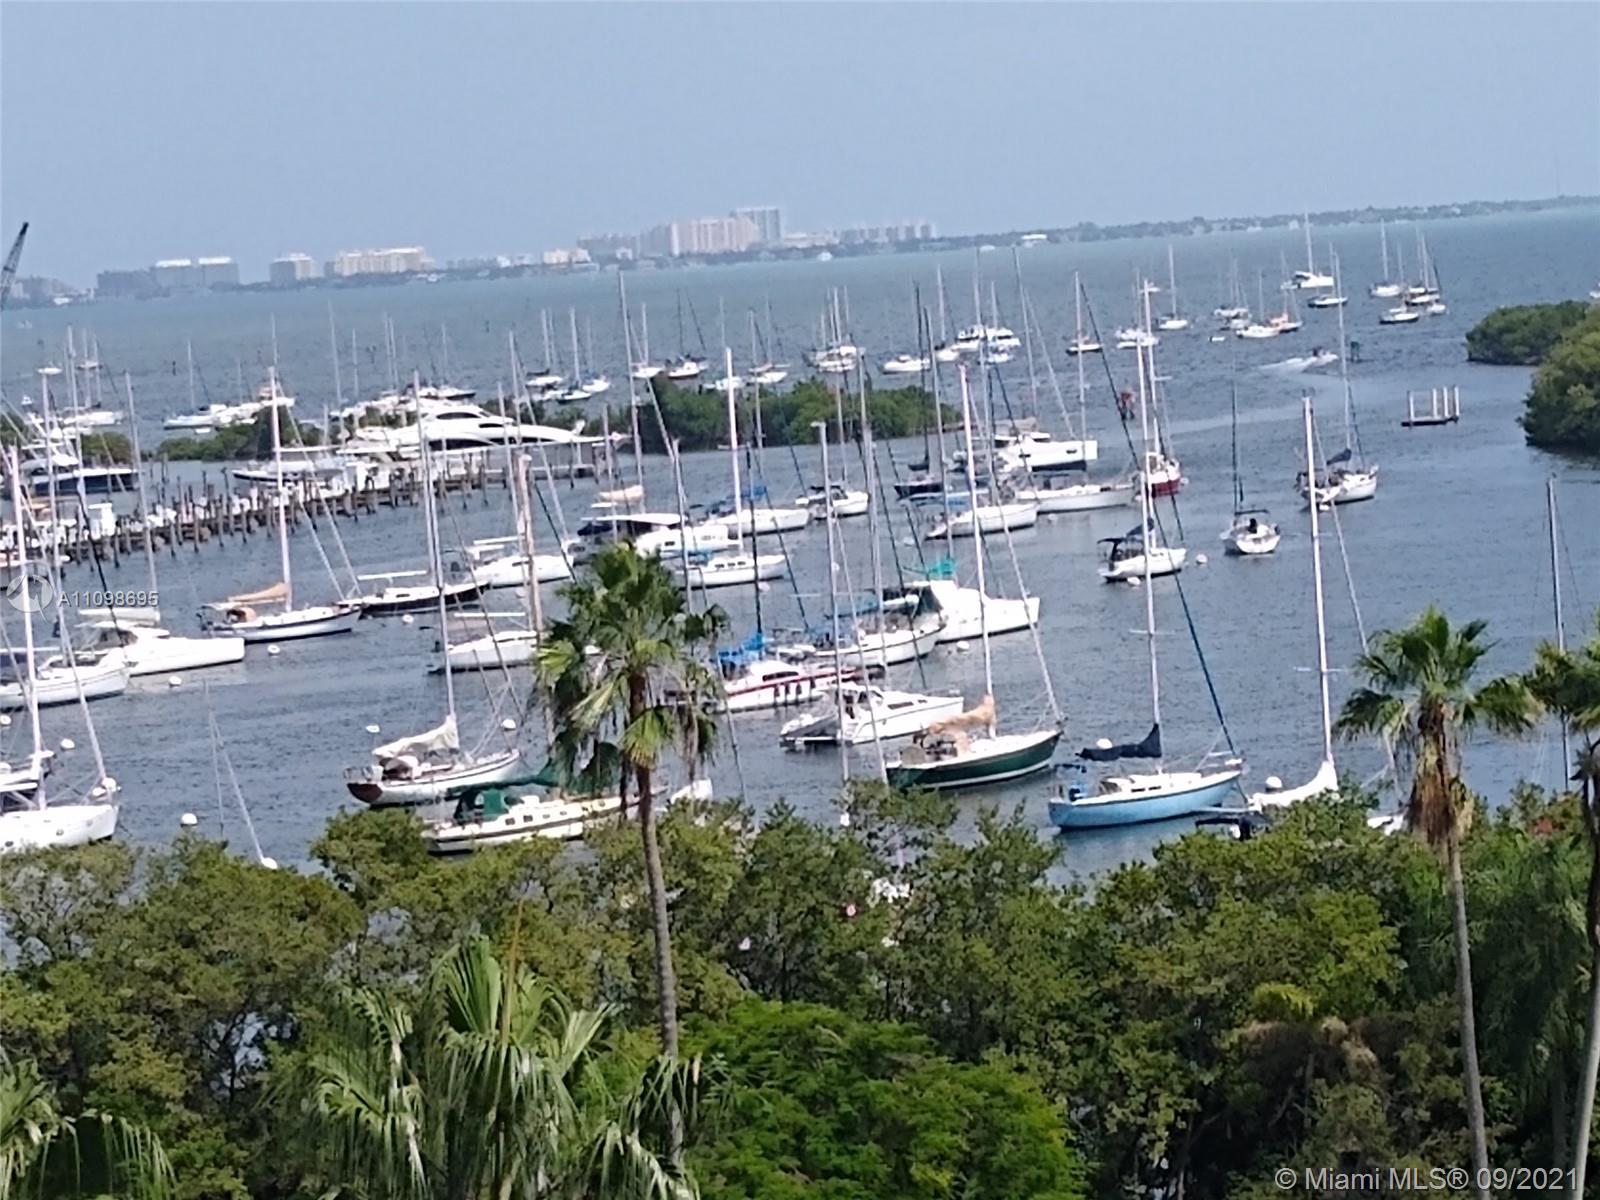 Investors dream come true! Historic Mutiny Hotel located in the heart of Coconut Grove with stunning views of the bay and marina. 

Walk to the newly renovated Coco walk with movie theater, trendy shops and first class restaurants. Unit has numerous amenities you’d expect in this upscale building including full gym, restaurant, valet parking and 24 hour security. You can live in this beautiful unit enjoying all it has to offer or as an investment property -enrolling it in  the hotel rental program. Hurry to enjoy all that  this exclusive property offers !!